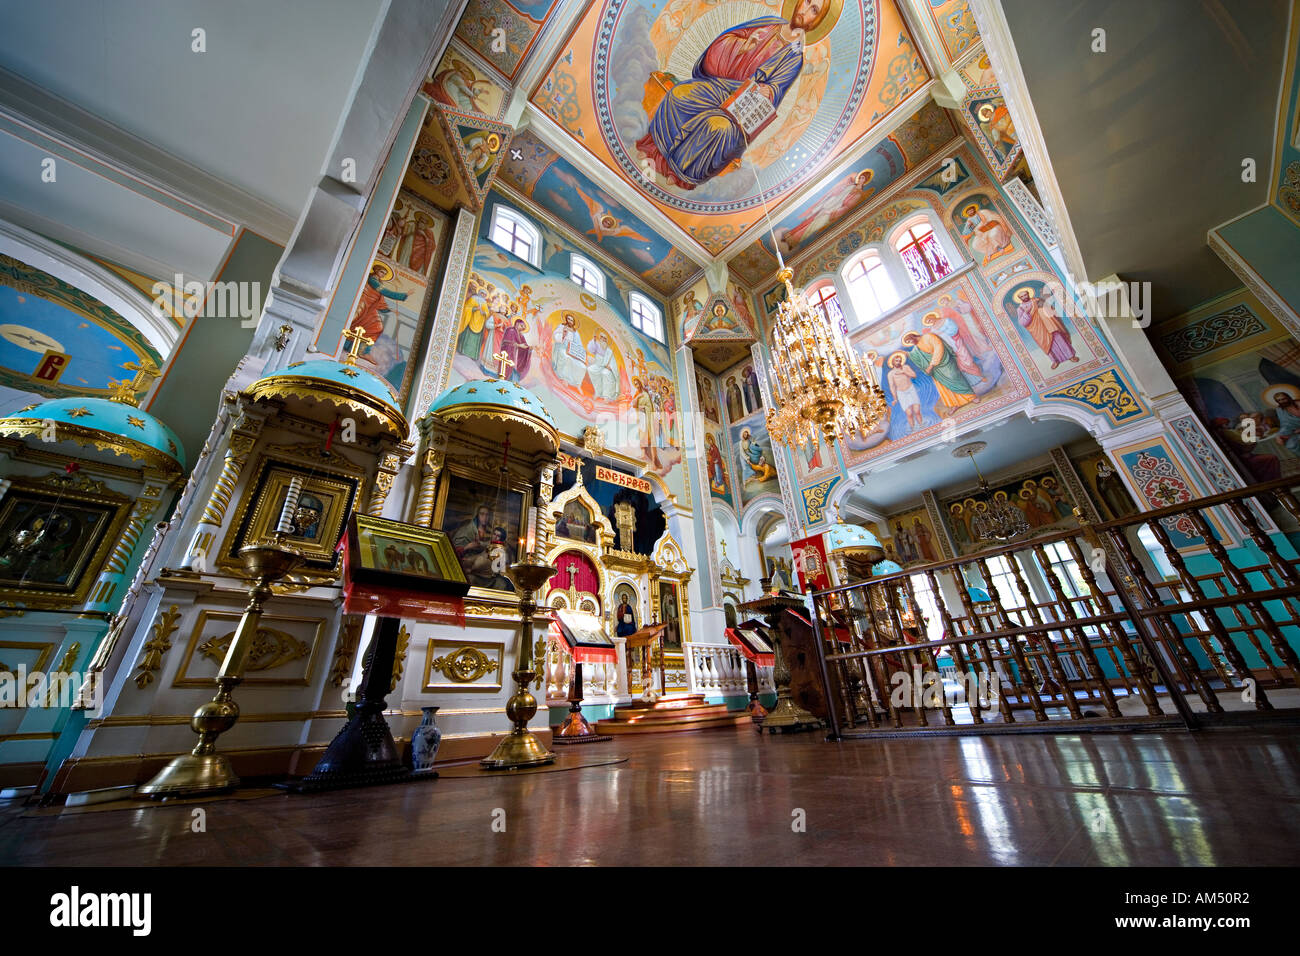 Church interior Almaty Kazakhstan. Main Altar, Iconostasis, ornaments and painted ceiling in Saint Nicholas Cathedral. Stock Photo